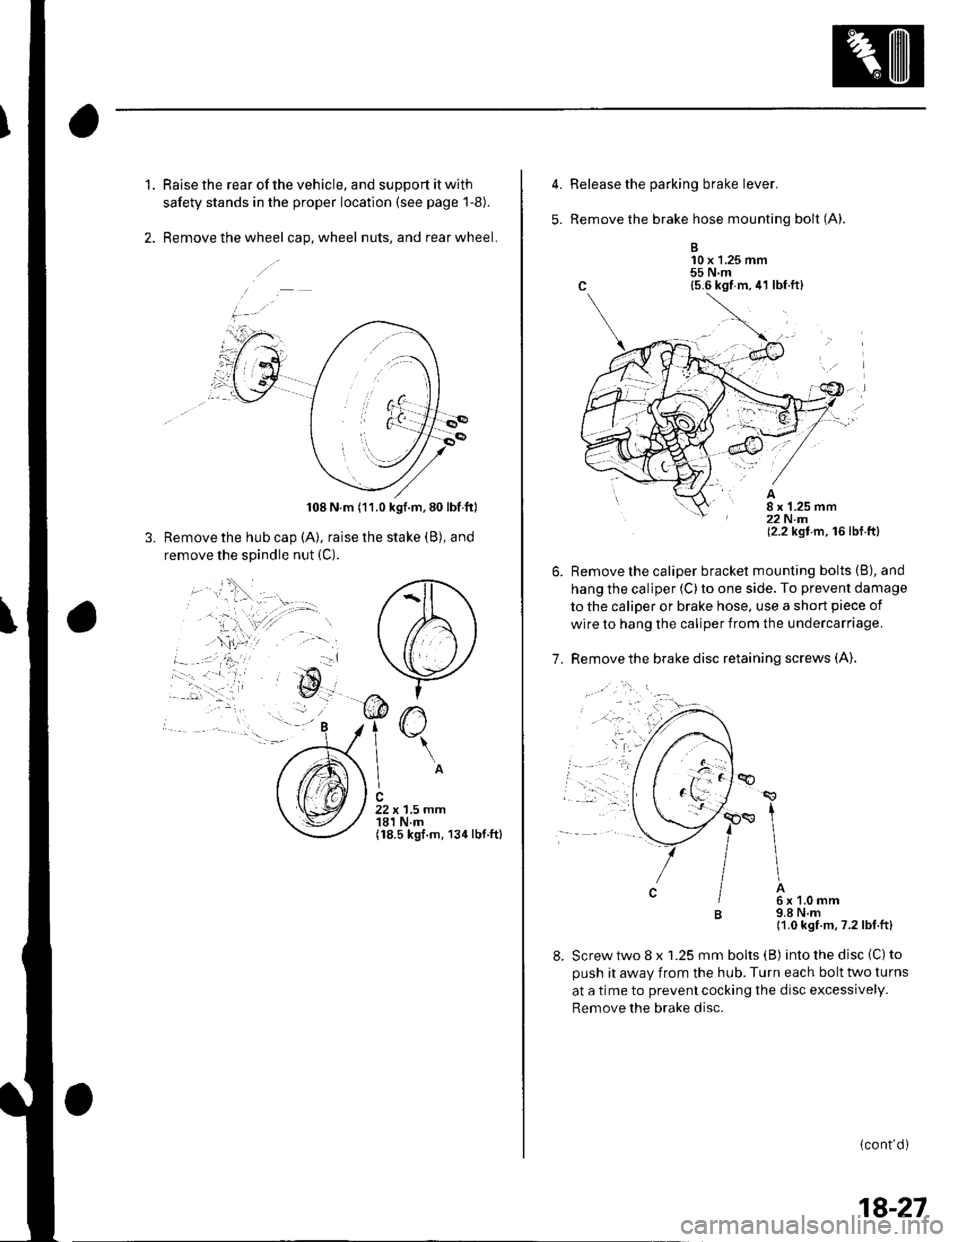 HONDA CIVIC 2002 7.G Service Manual 1.Raise the rear of the vehicle, and support it with
safety stands in the proper location (see page l-8).
Remove the wheel cap. wheel nuts, and rear wheel.
108 N.m (11.0 kgf.m,80 lbf ftl
Remove the h